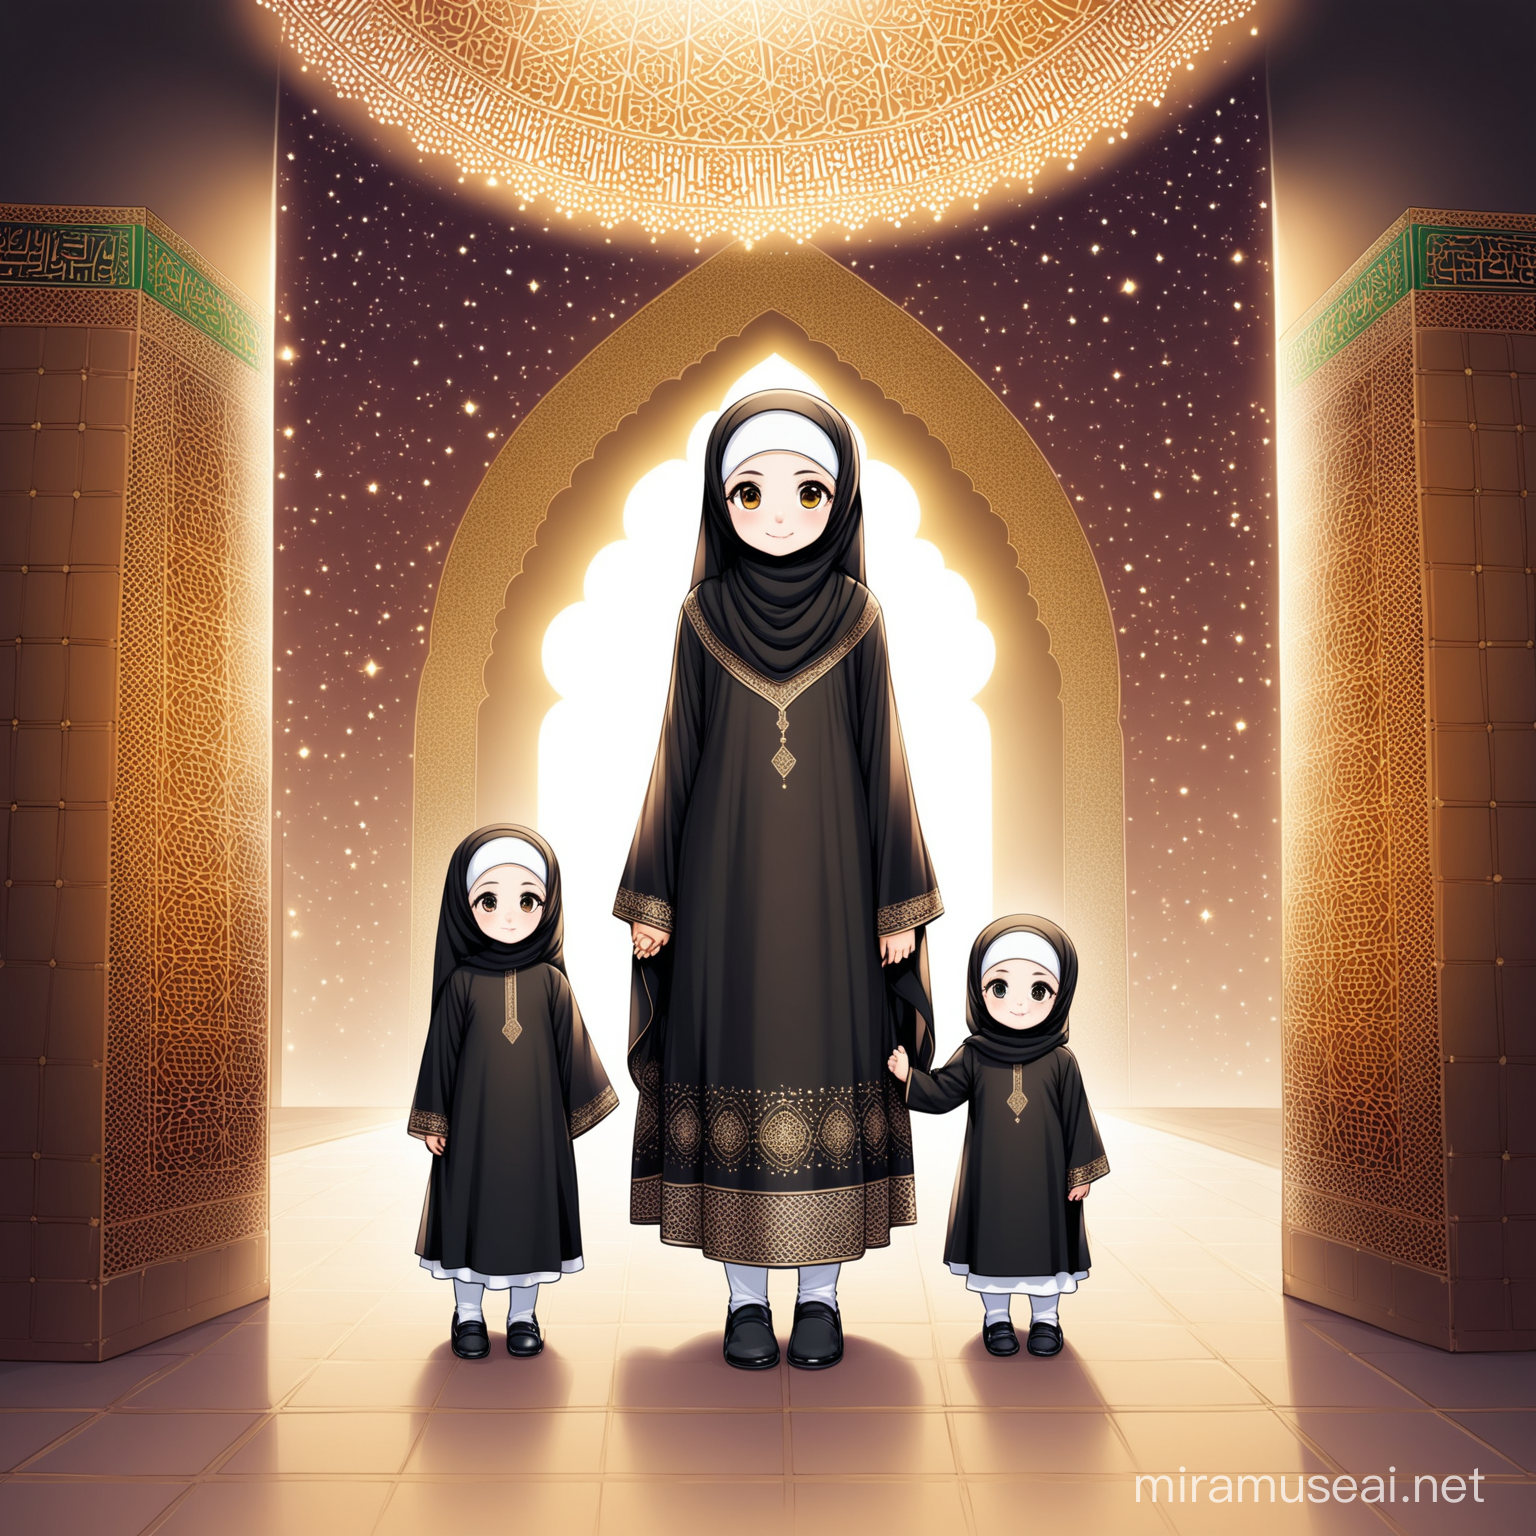 Character Persian little girl(full height, Muslim, with emphasis no hair out of veil(Hijab), smaller eyes, bigger nose, white skin, cute, smiling, wearing socks, clothes full of Persian designs) with both father(not Arab) and mother.

Atmosphere Kaaba cube Qibla of Muslims, nobody.